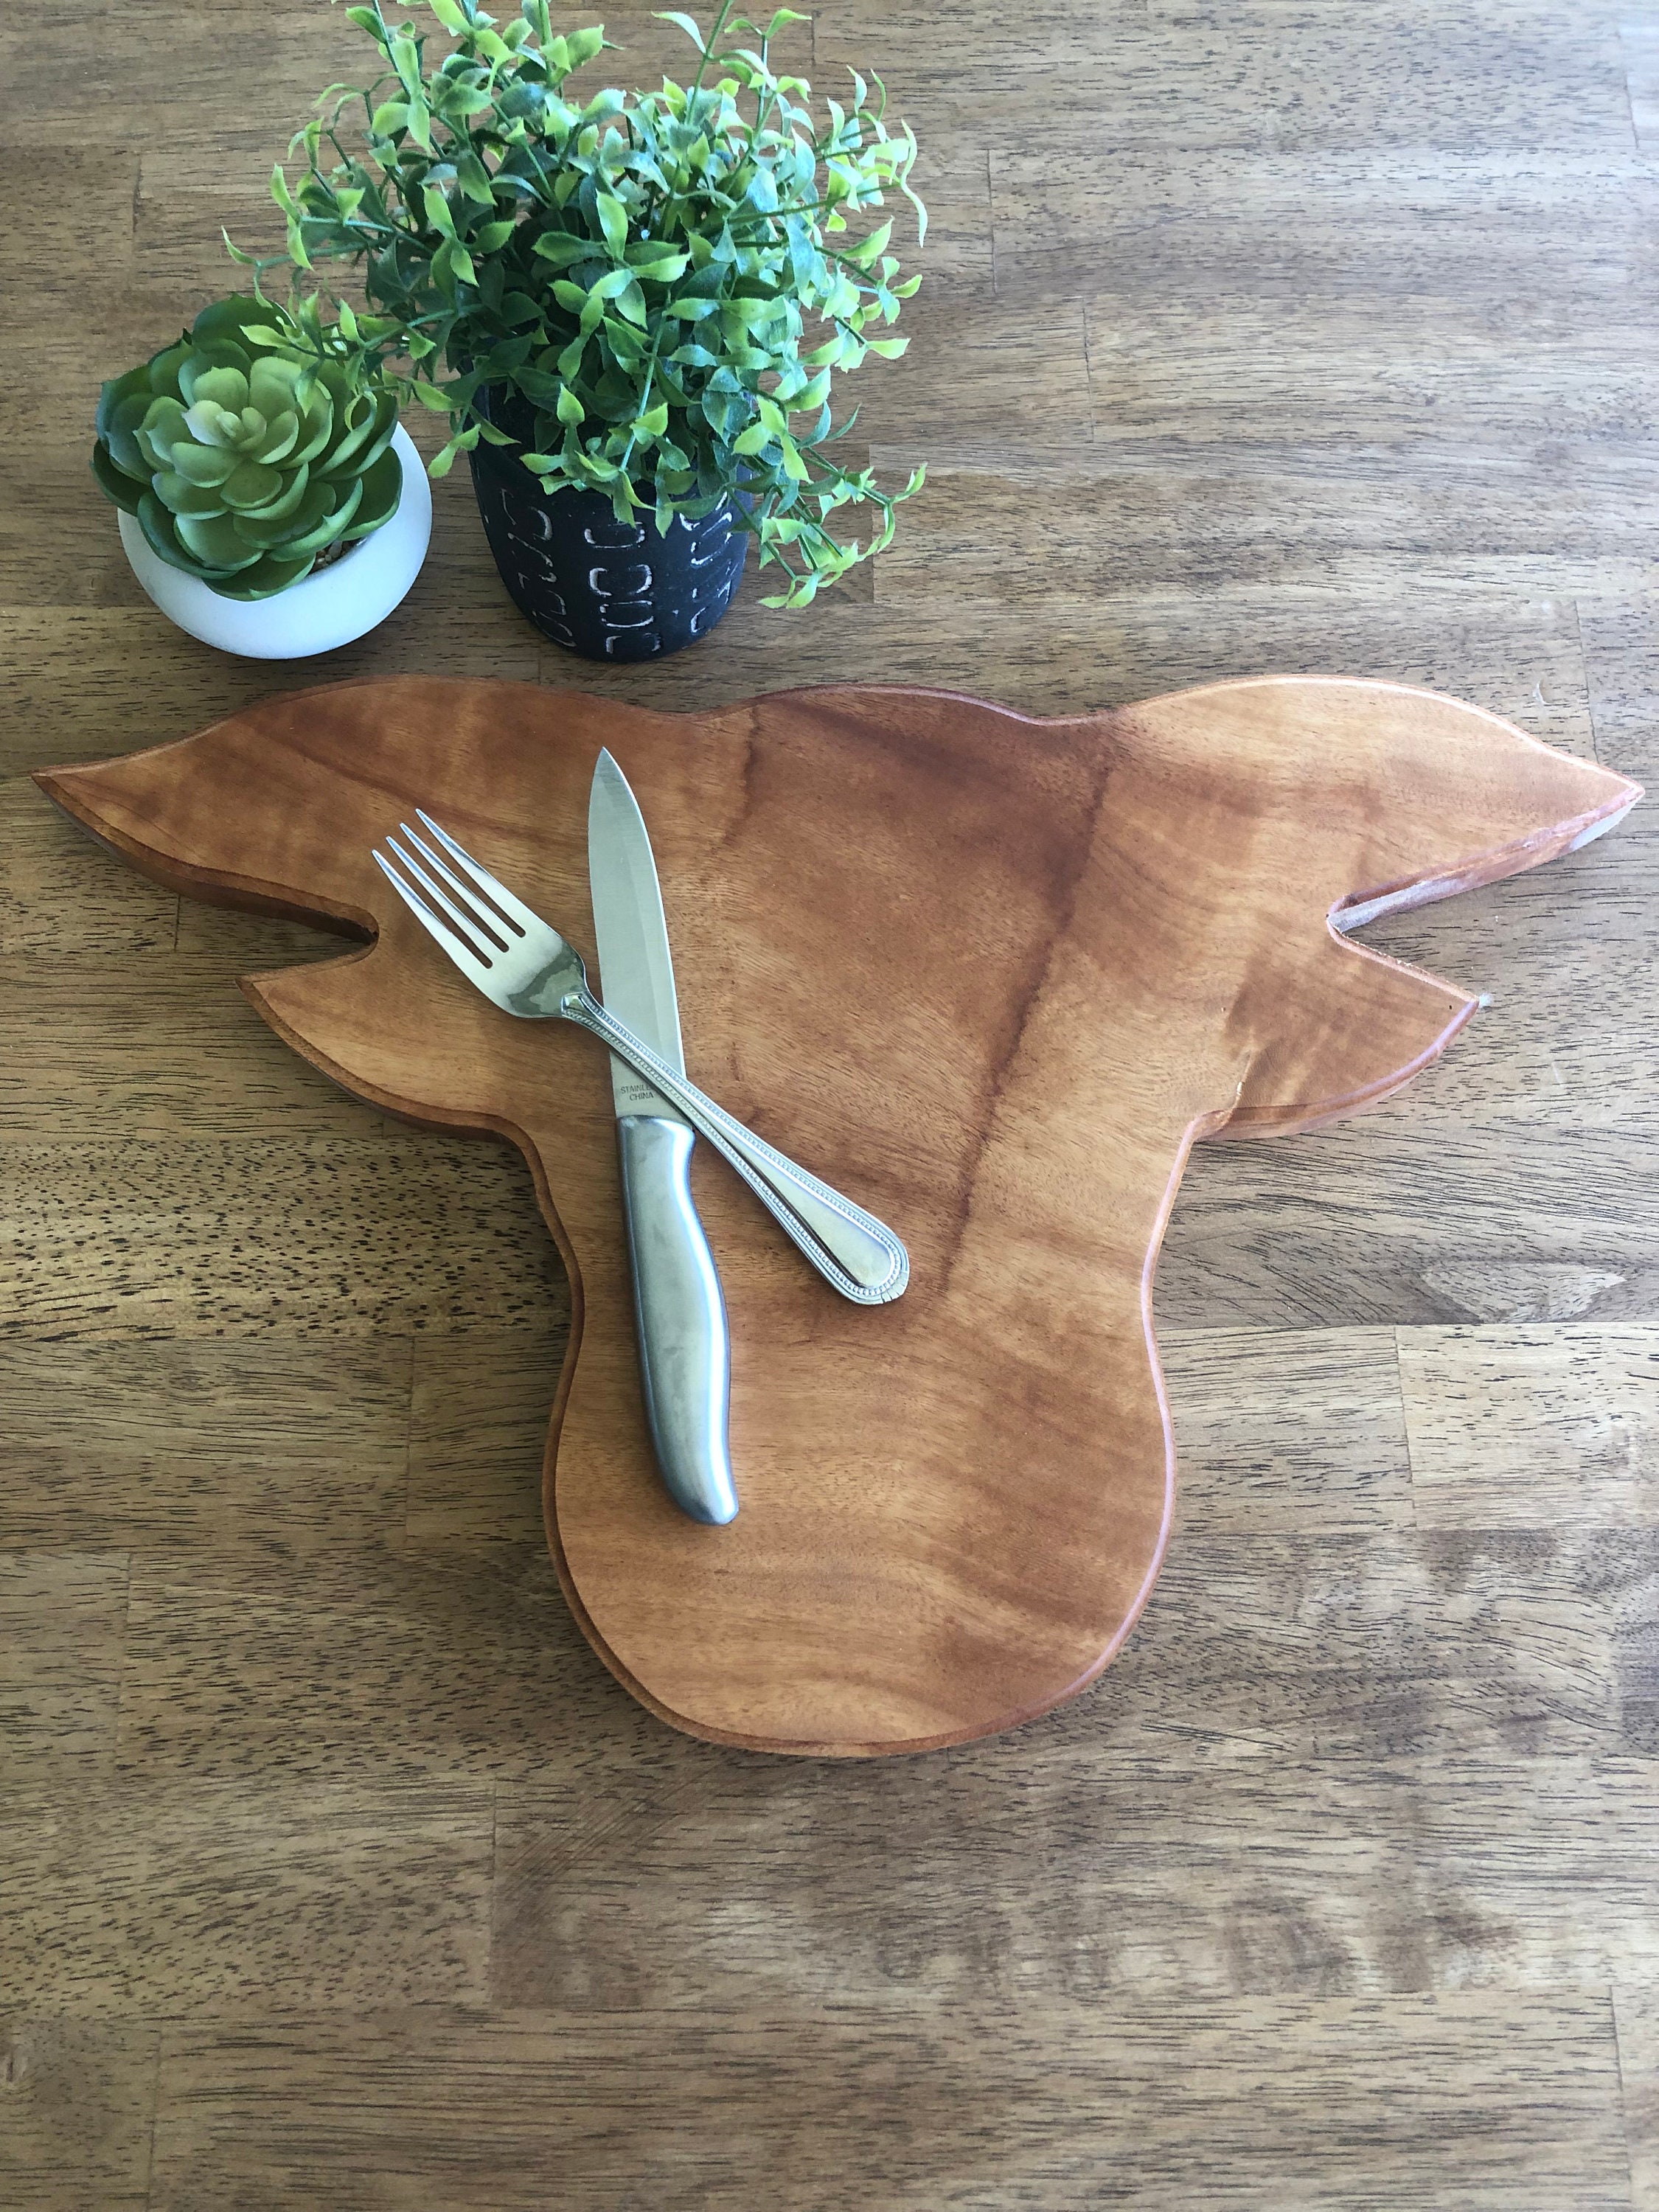 4 halved avocados sit on a cute cow-shaped wooden cutting board. A